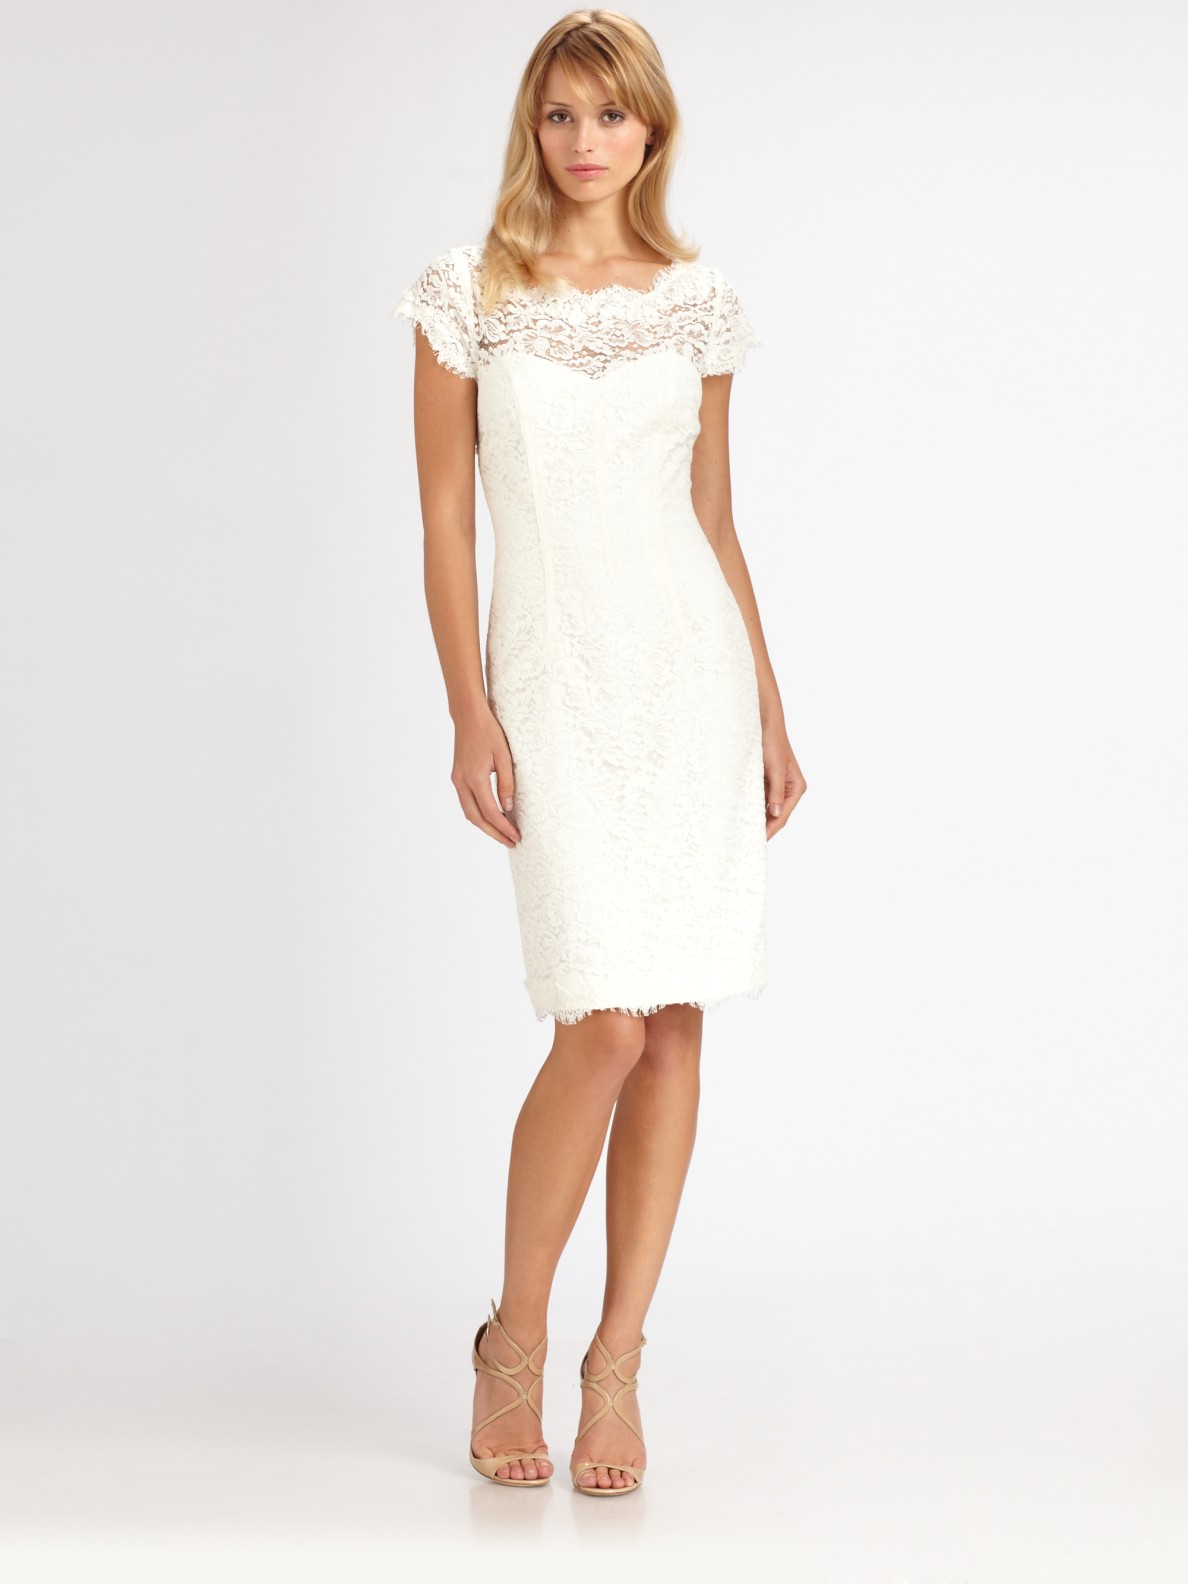 Floral Lace White Dress - New Fashion Collection